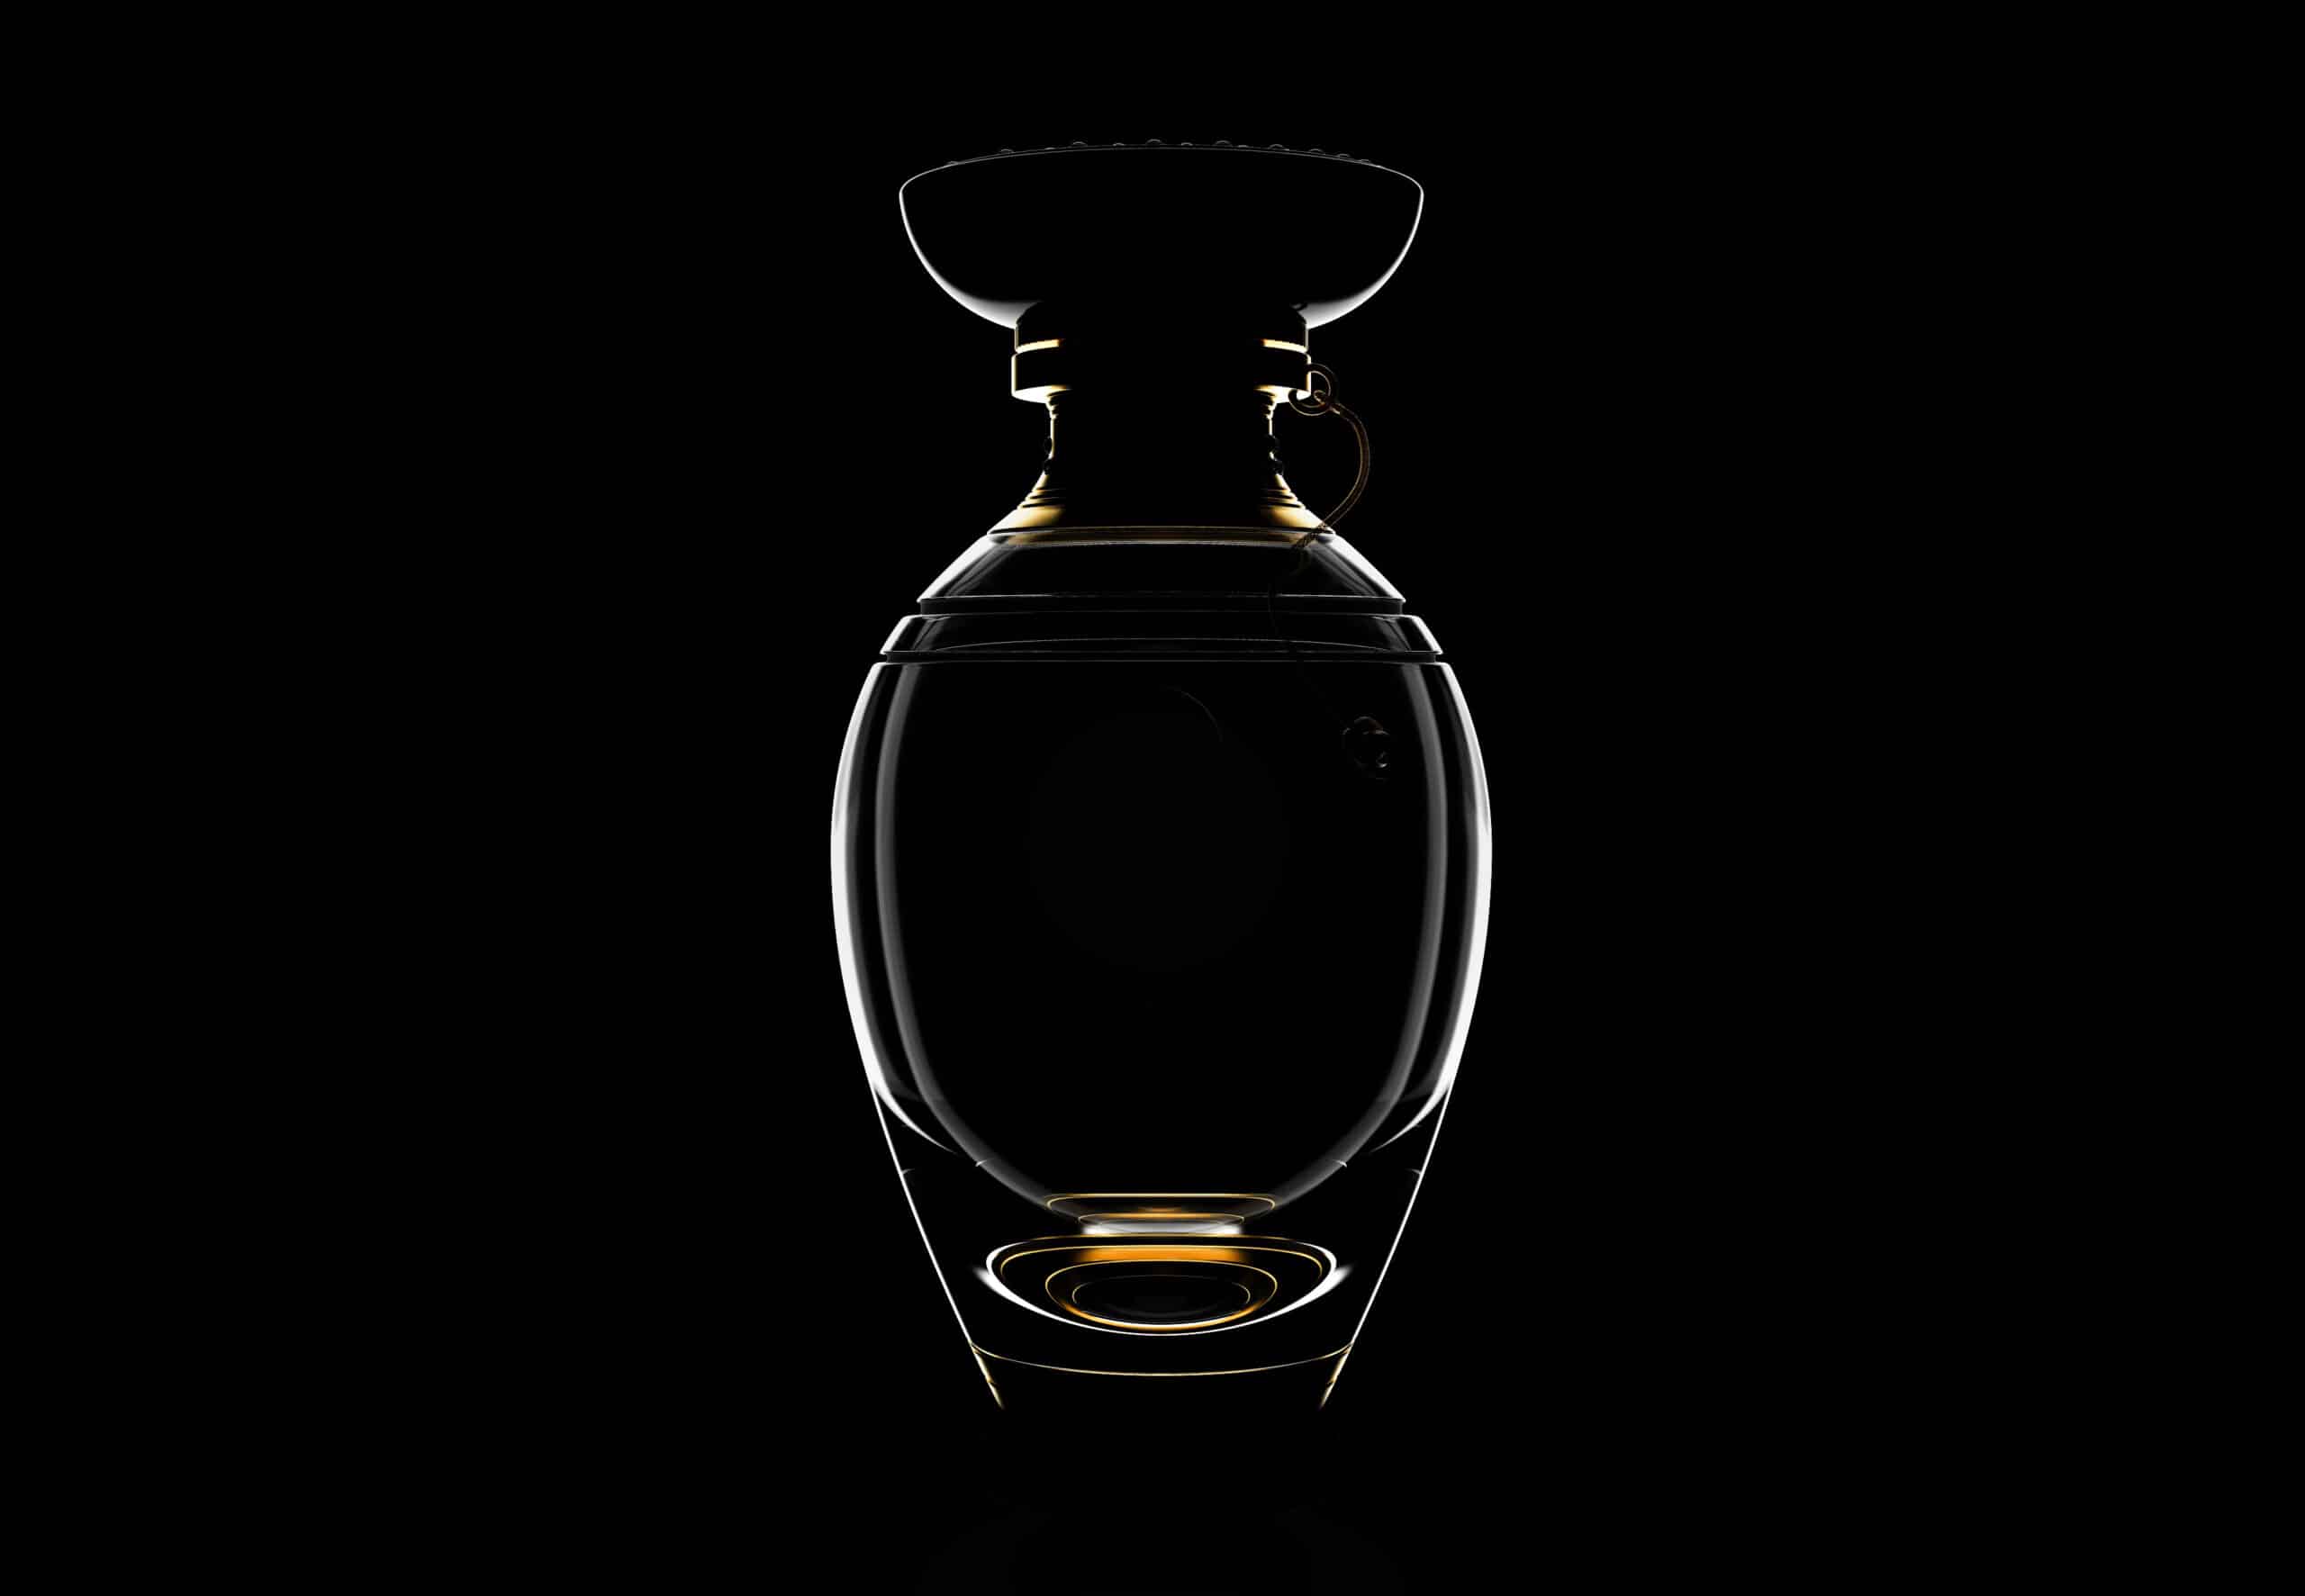 A glass jar for luxury whiskey